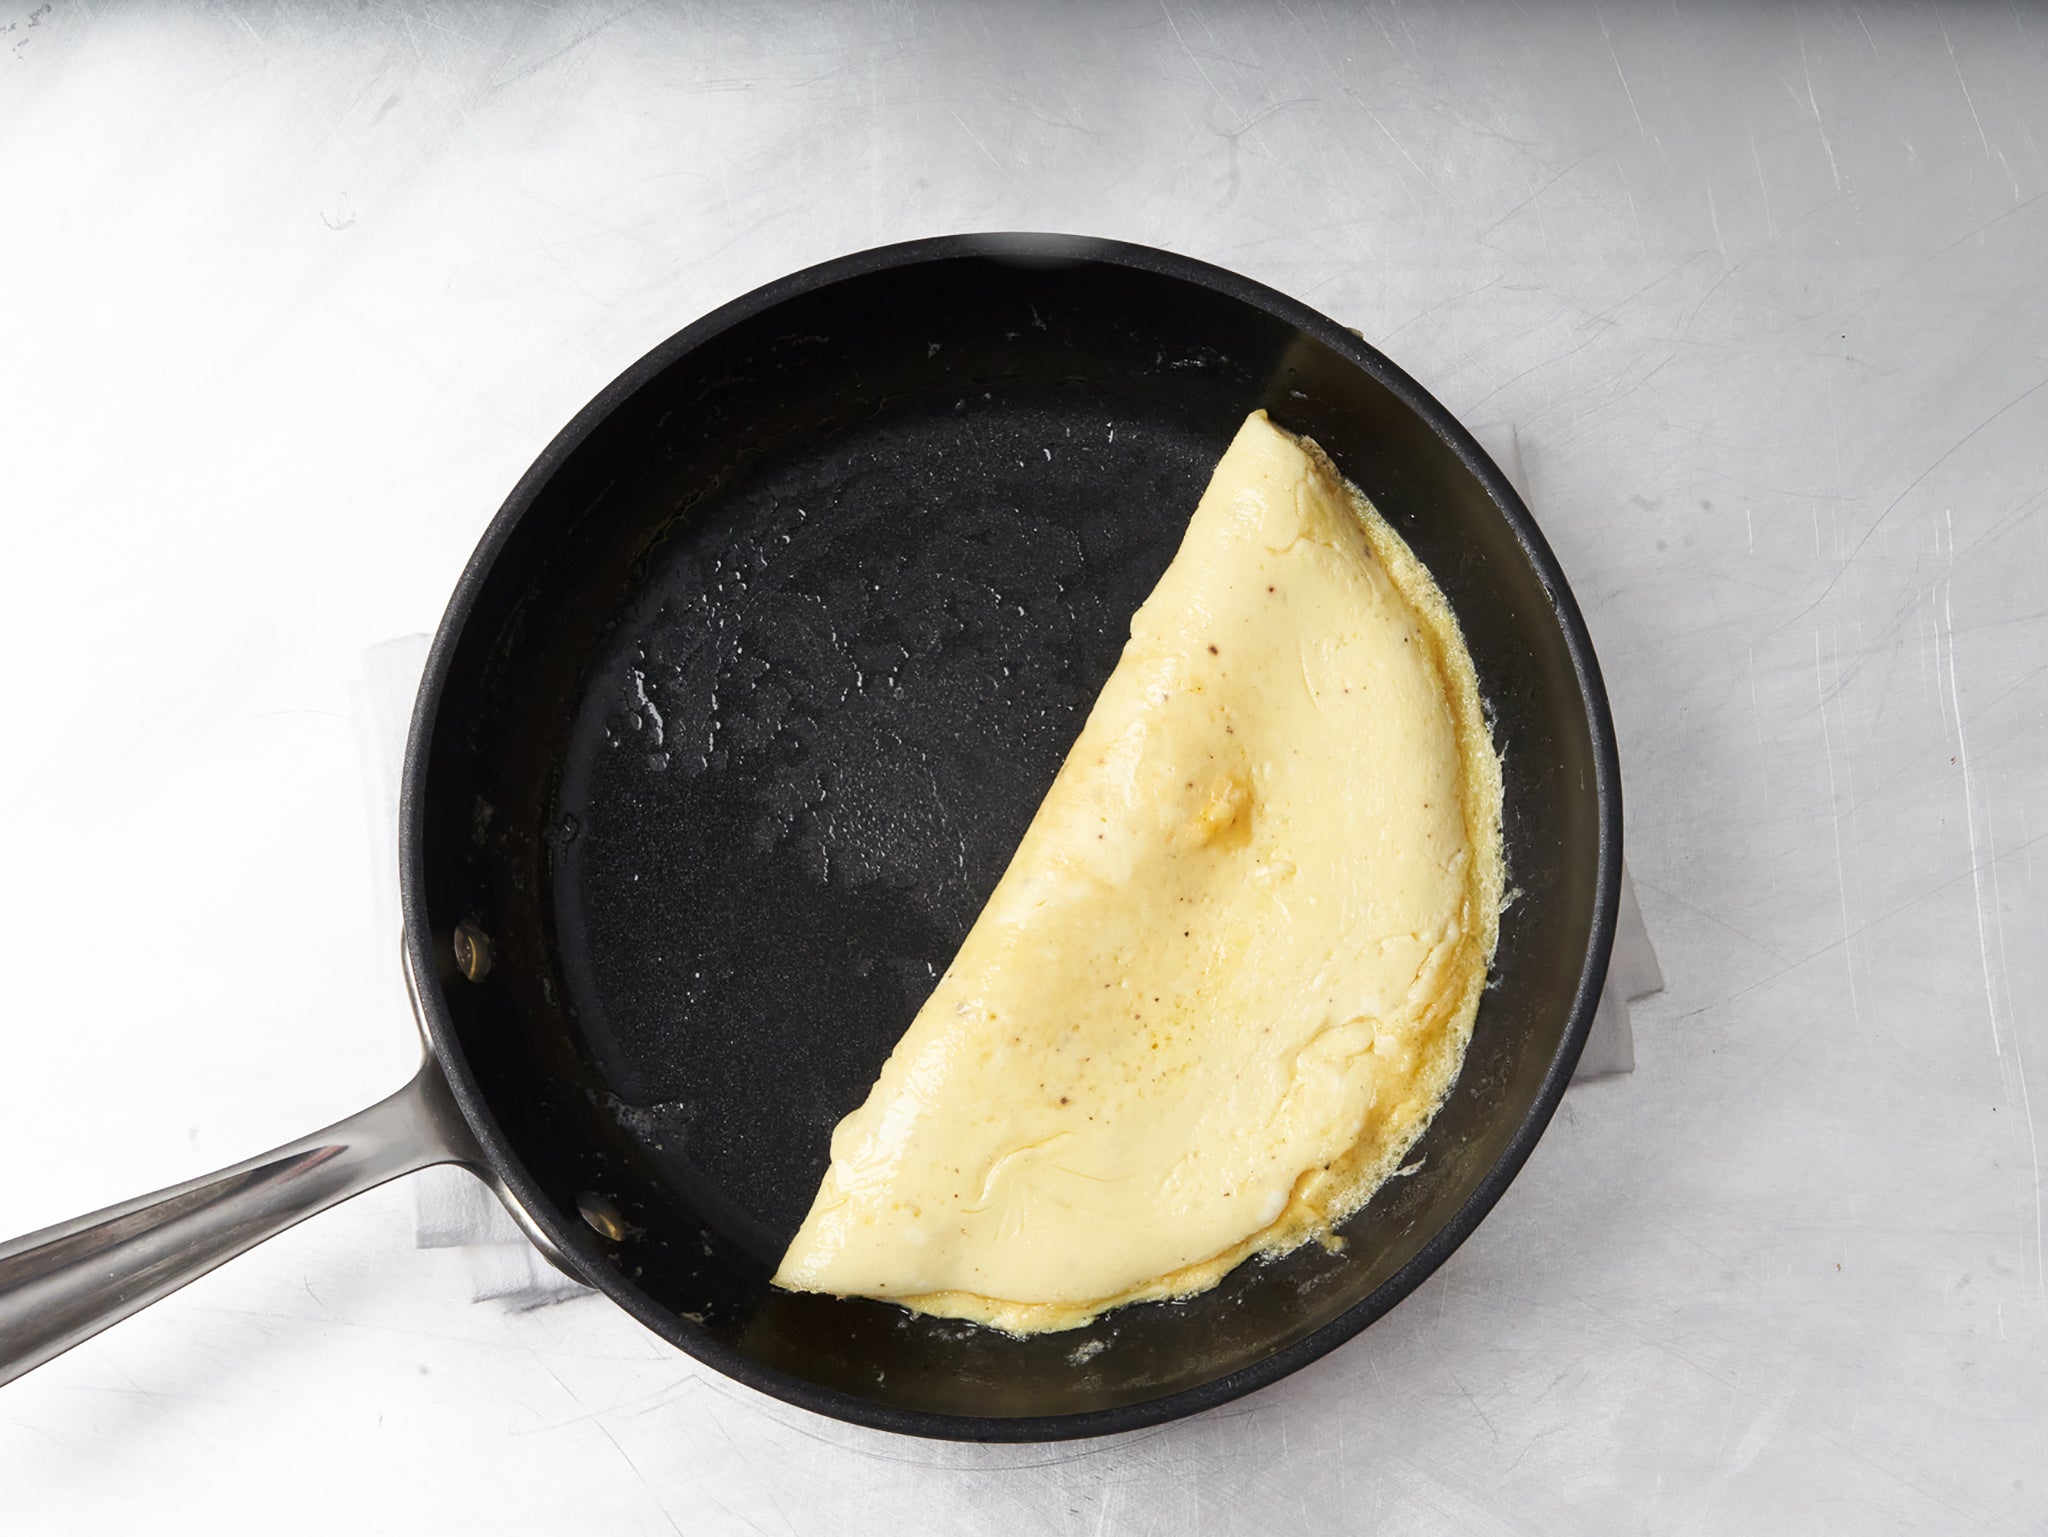 How To Make An Omelette at Home With The Omelette Maker